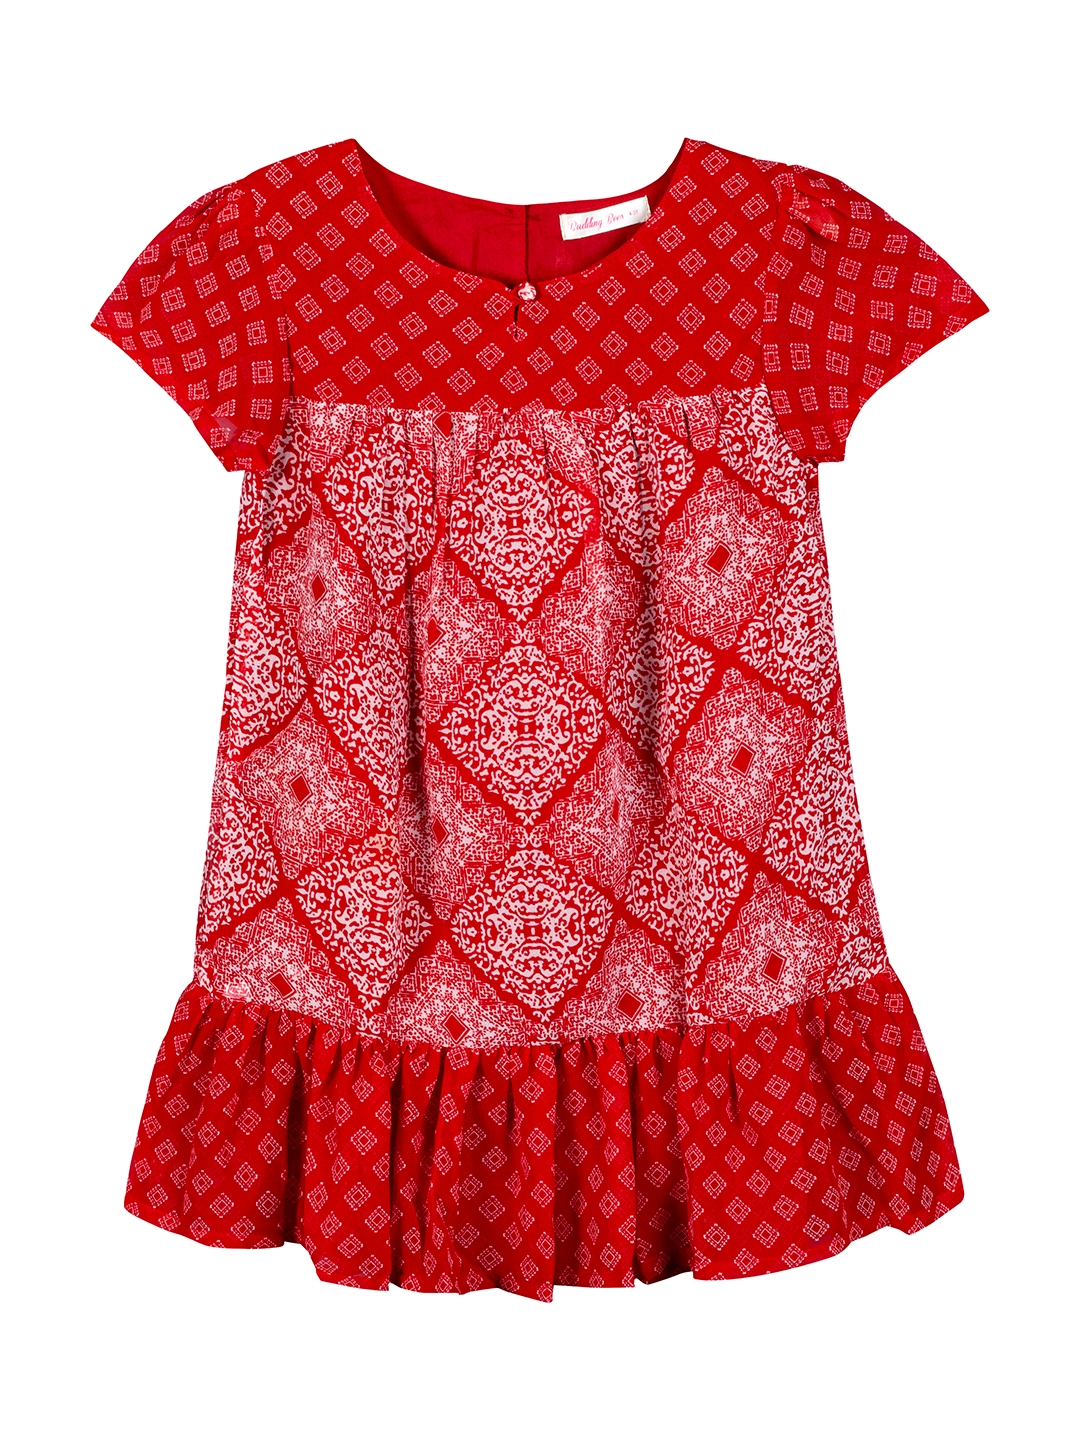 Budding Bees | Red Printed Dress